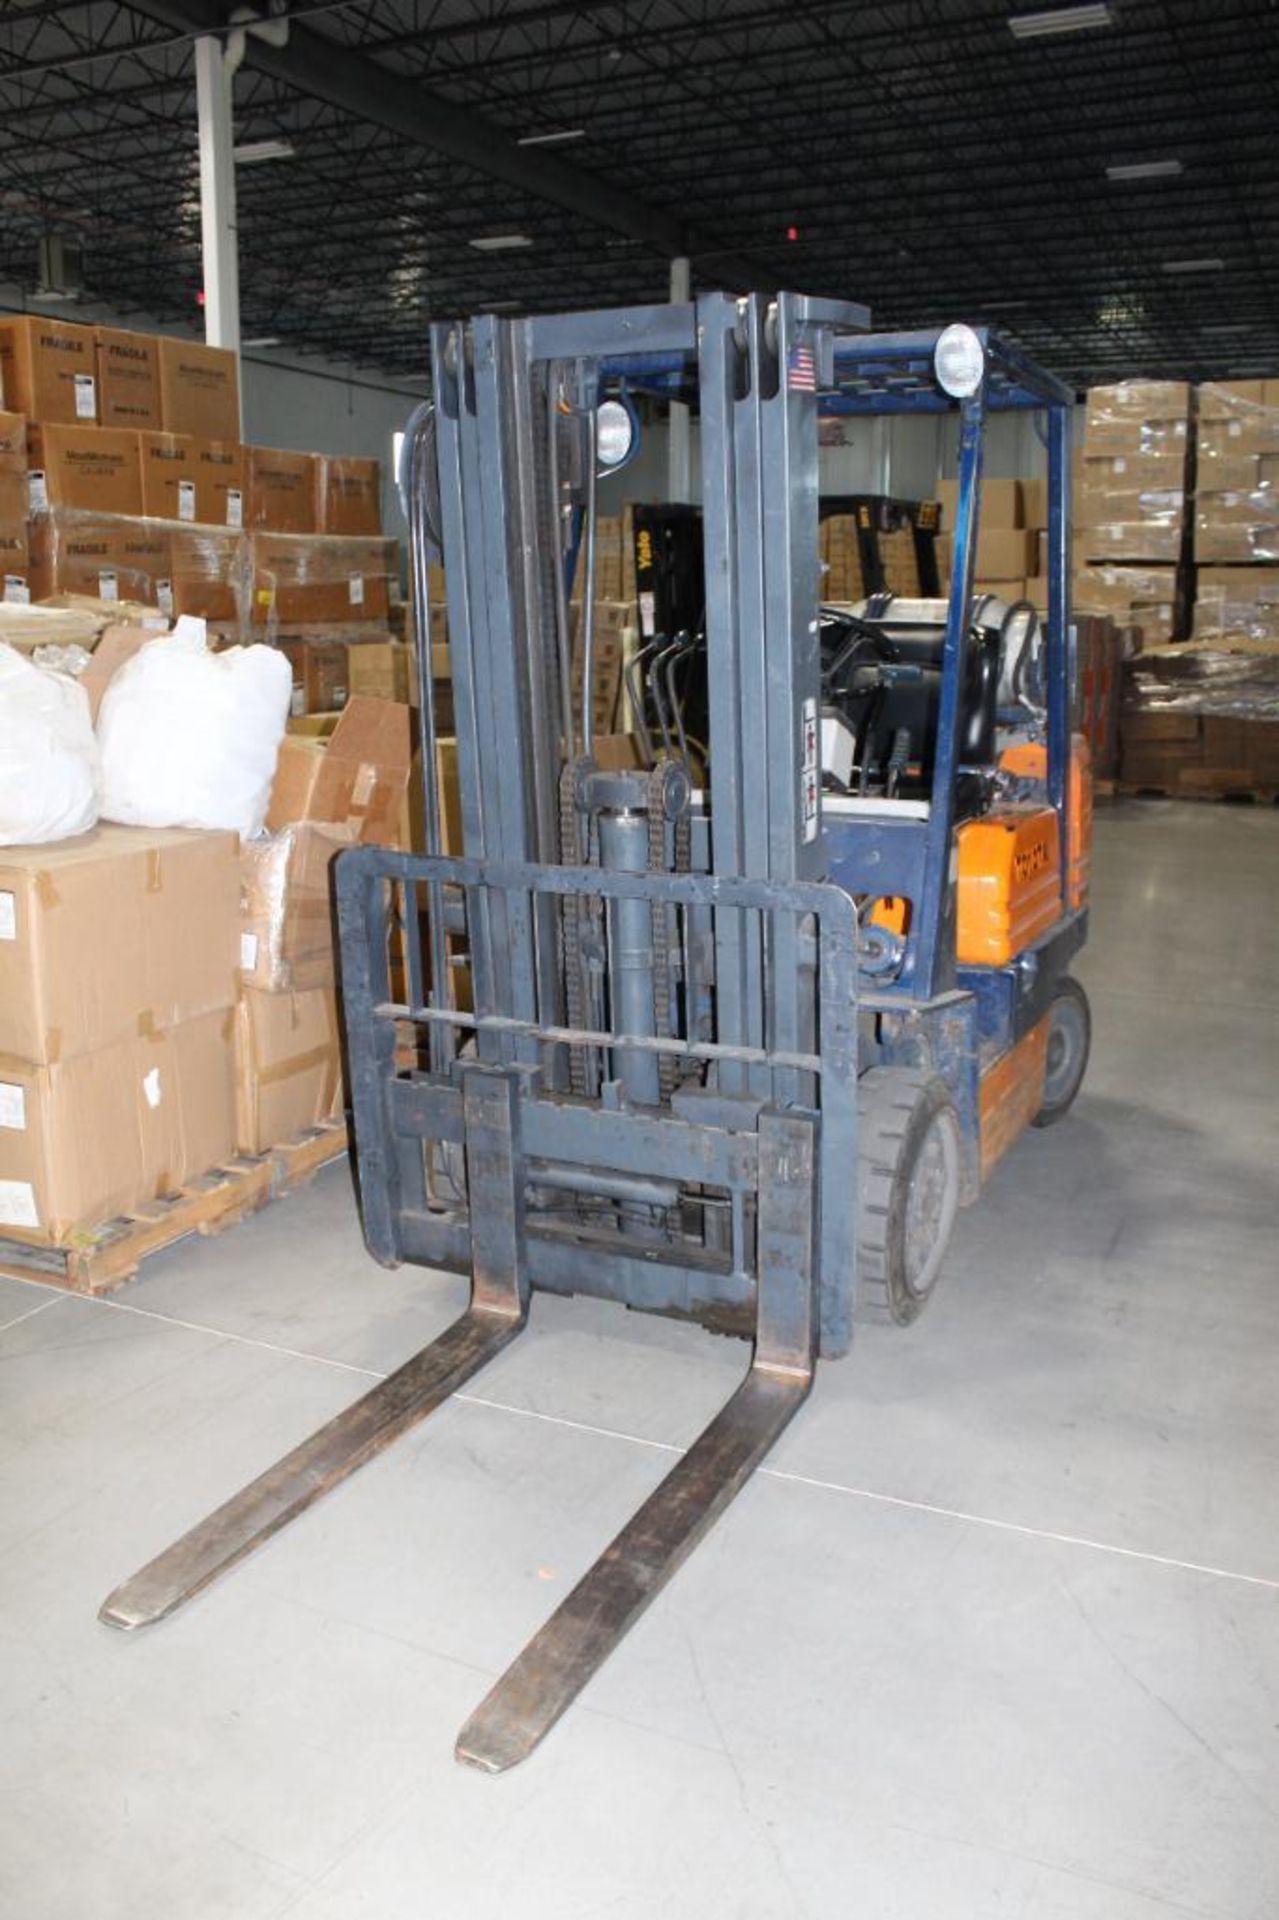 Toyota 4900 Capacity Lift Truck - Delayed Removal - Image 5 of 9